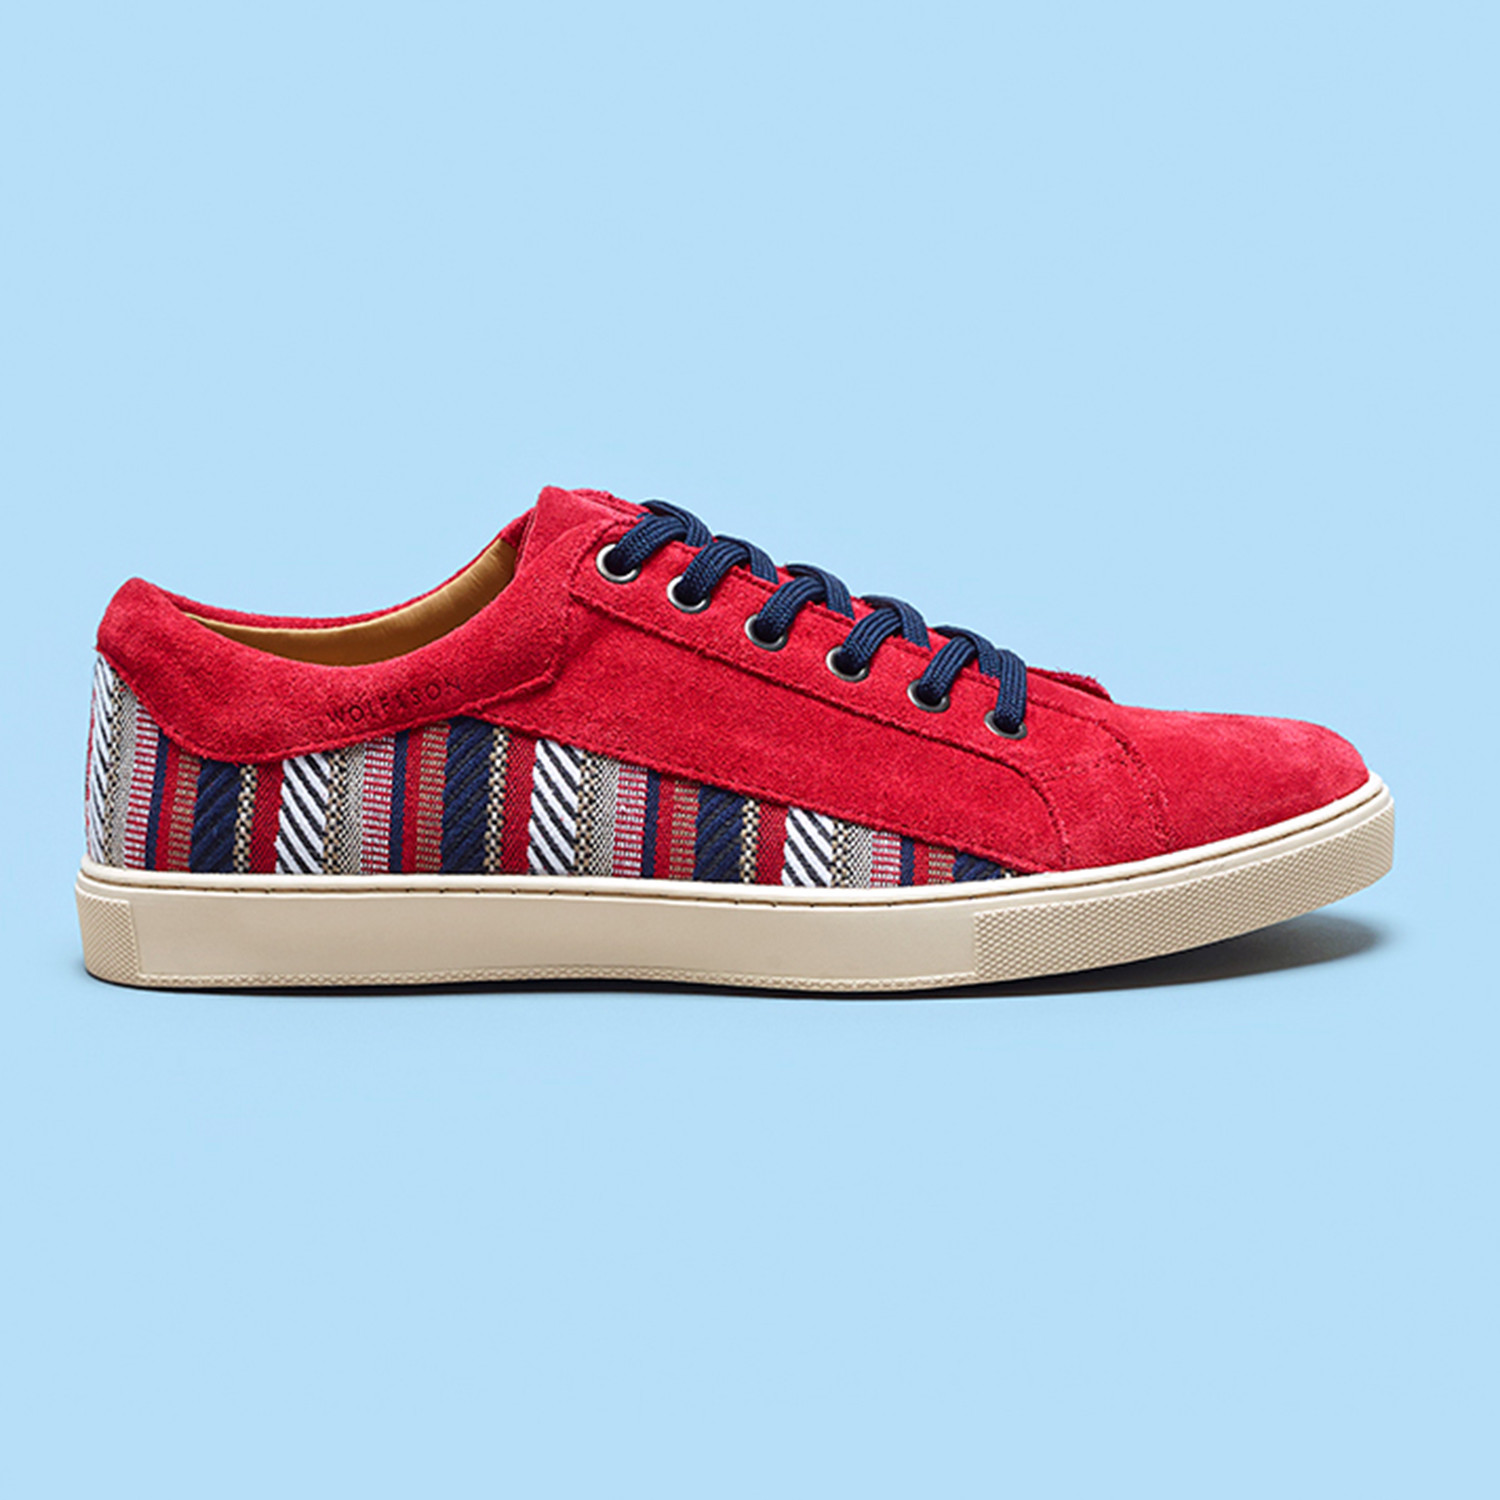 red ship shoes